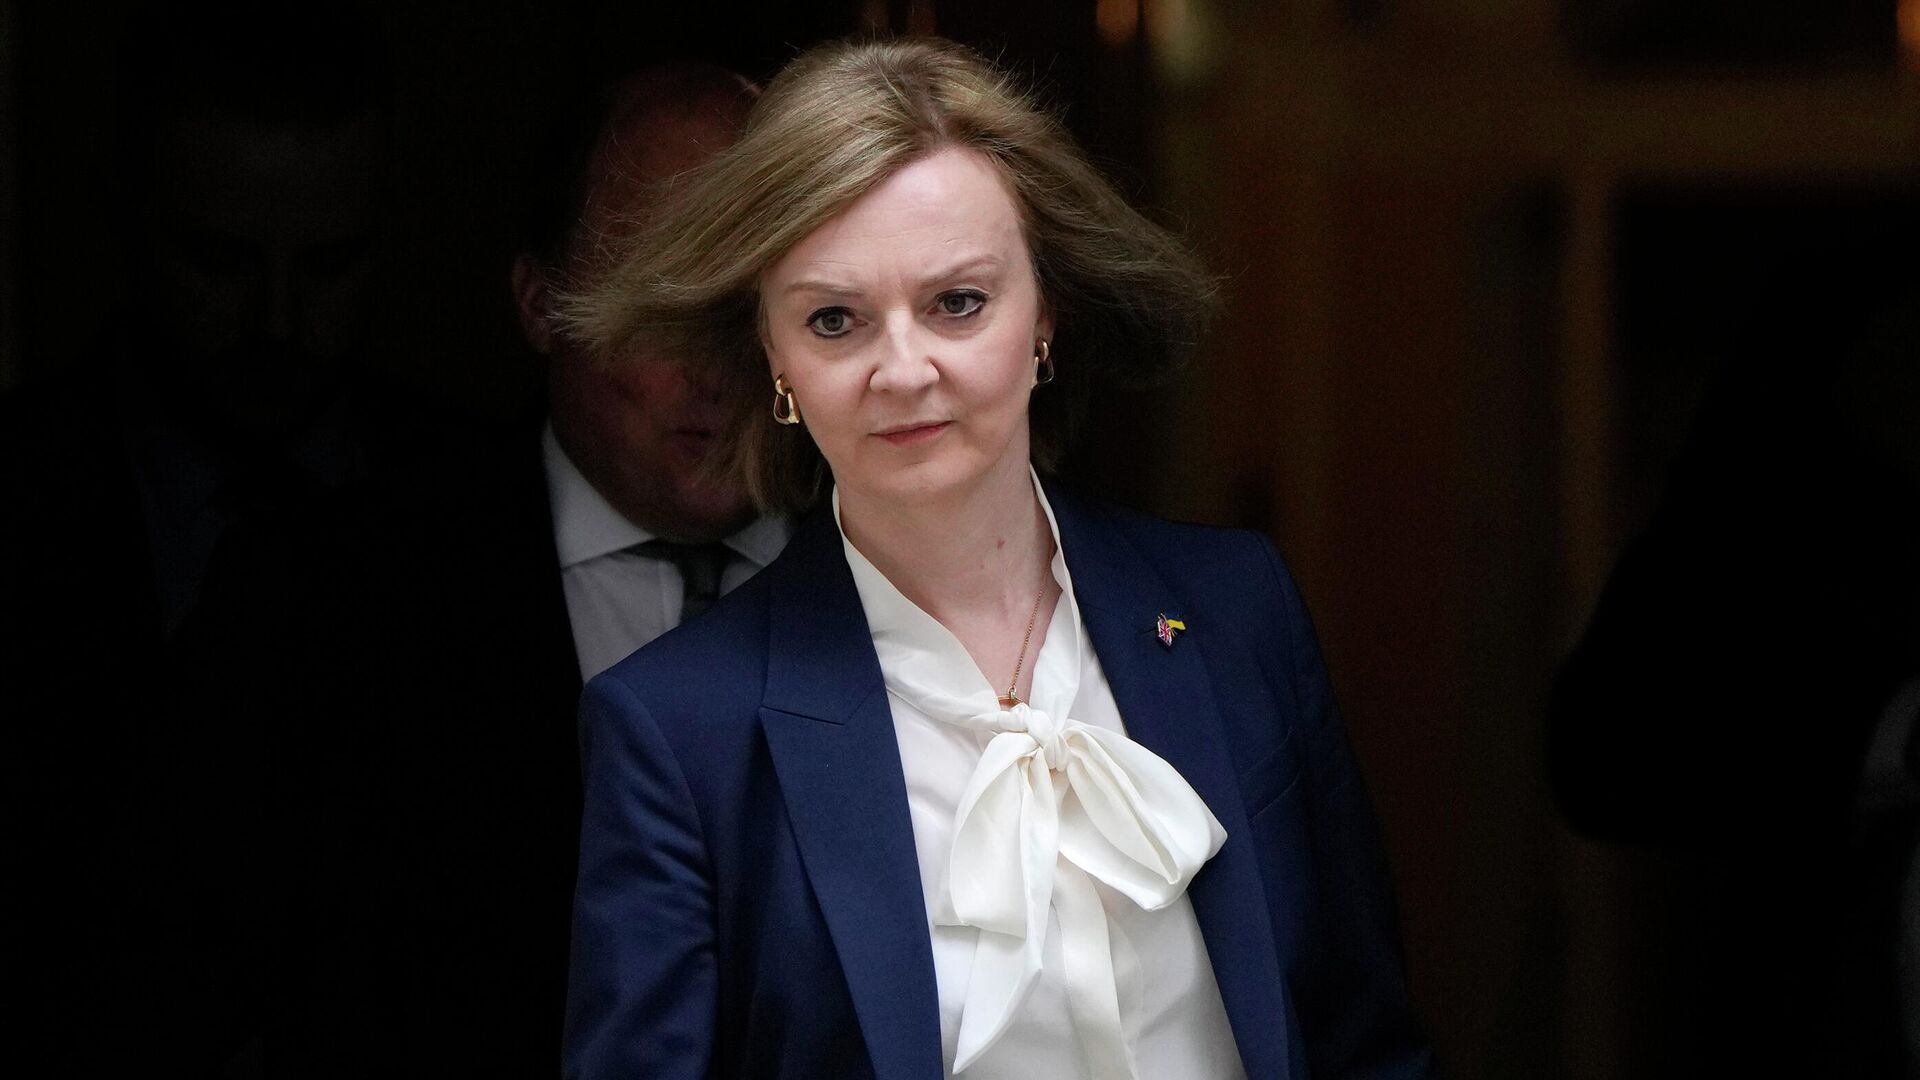  Liz Truss, Britain's Foreign Secretary leaves a Cabinet meeting at 10 Downing Street in London, Tuesday, April 19, 2022 - Sputnik International, 1920, 02.08.2022